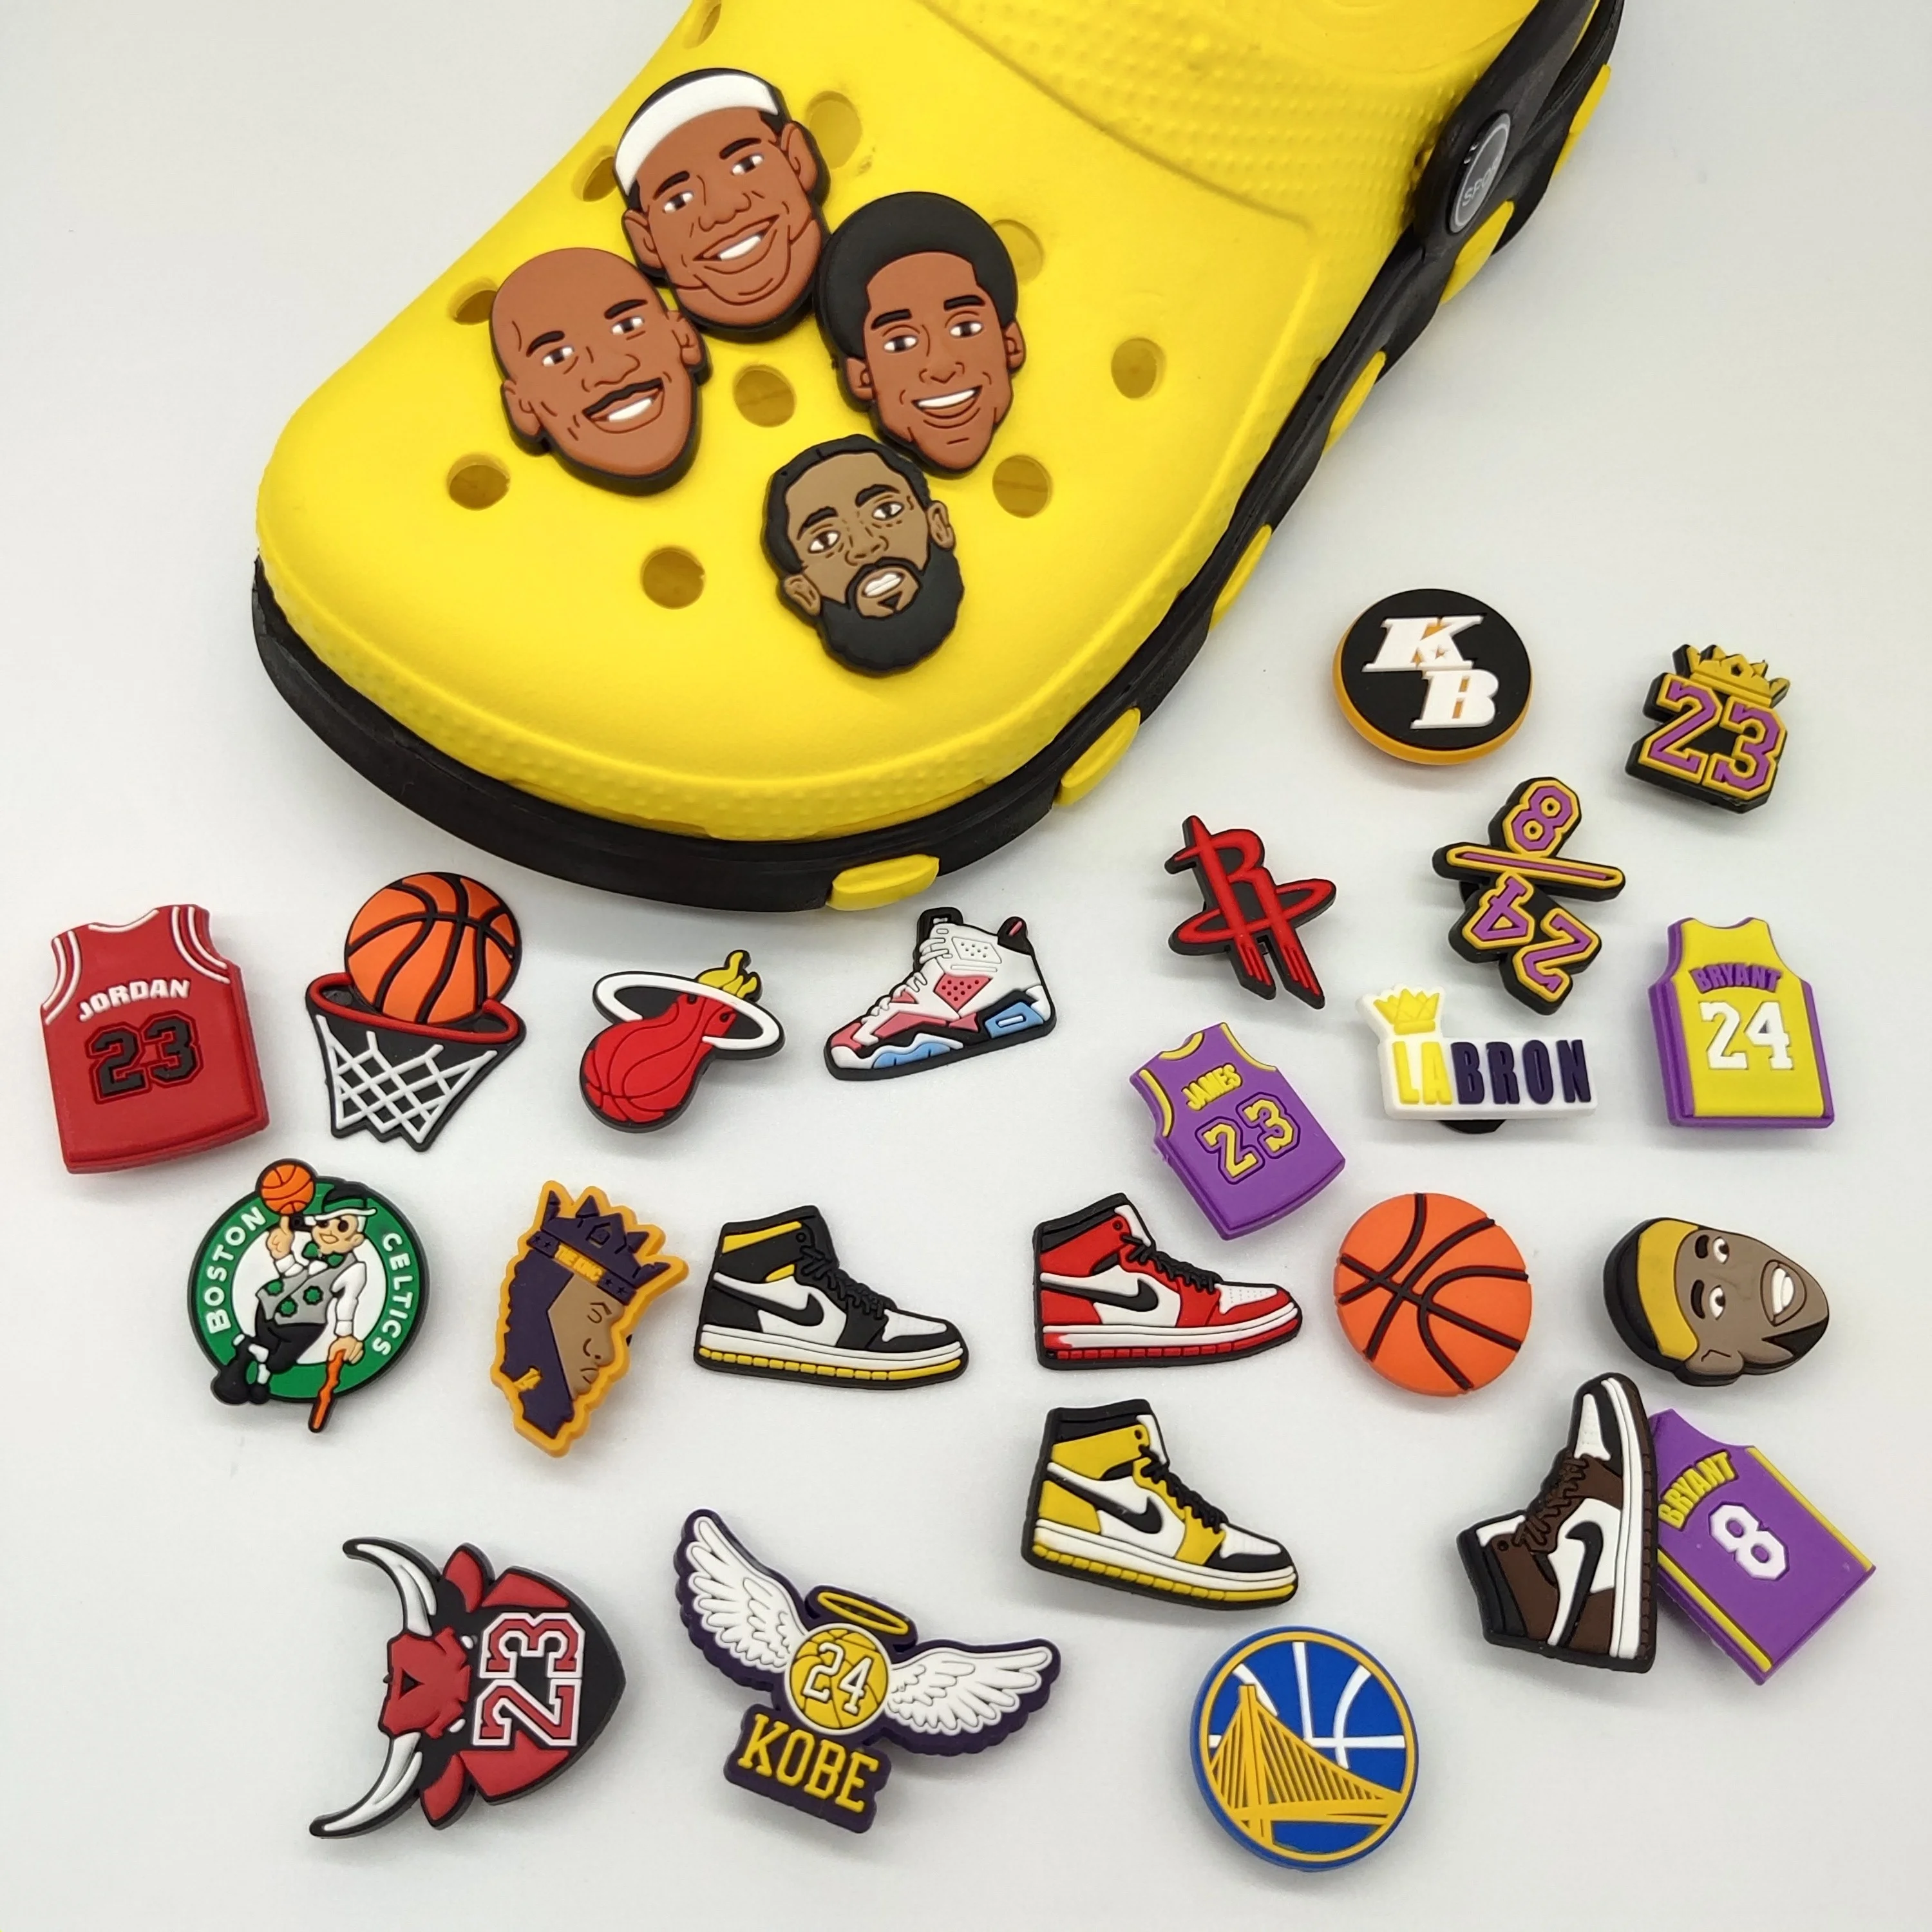 

Kobe designs sports shoes charms available promotional shoes decoration charms wholesale soft PVC shoe charms for croc gibz, As picture